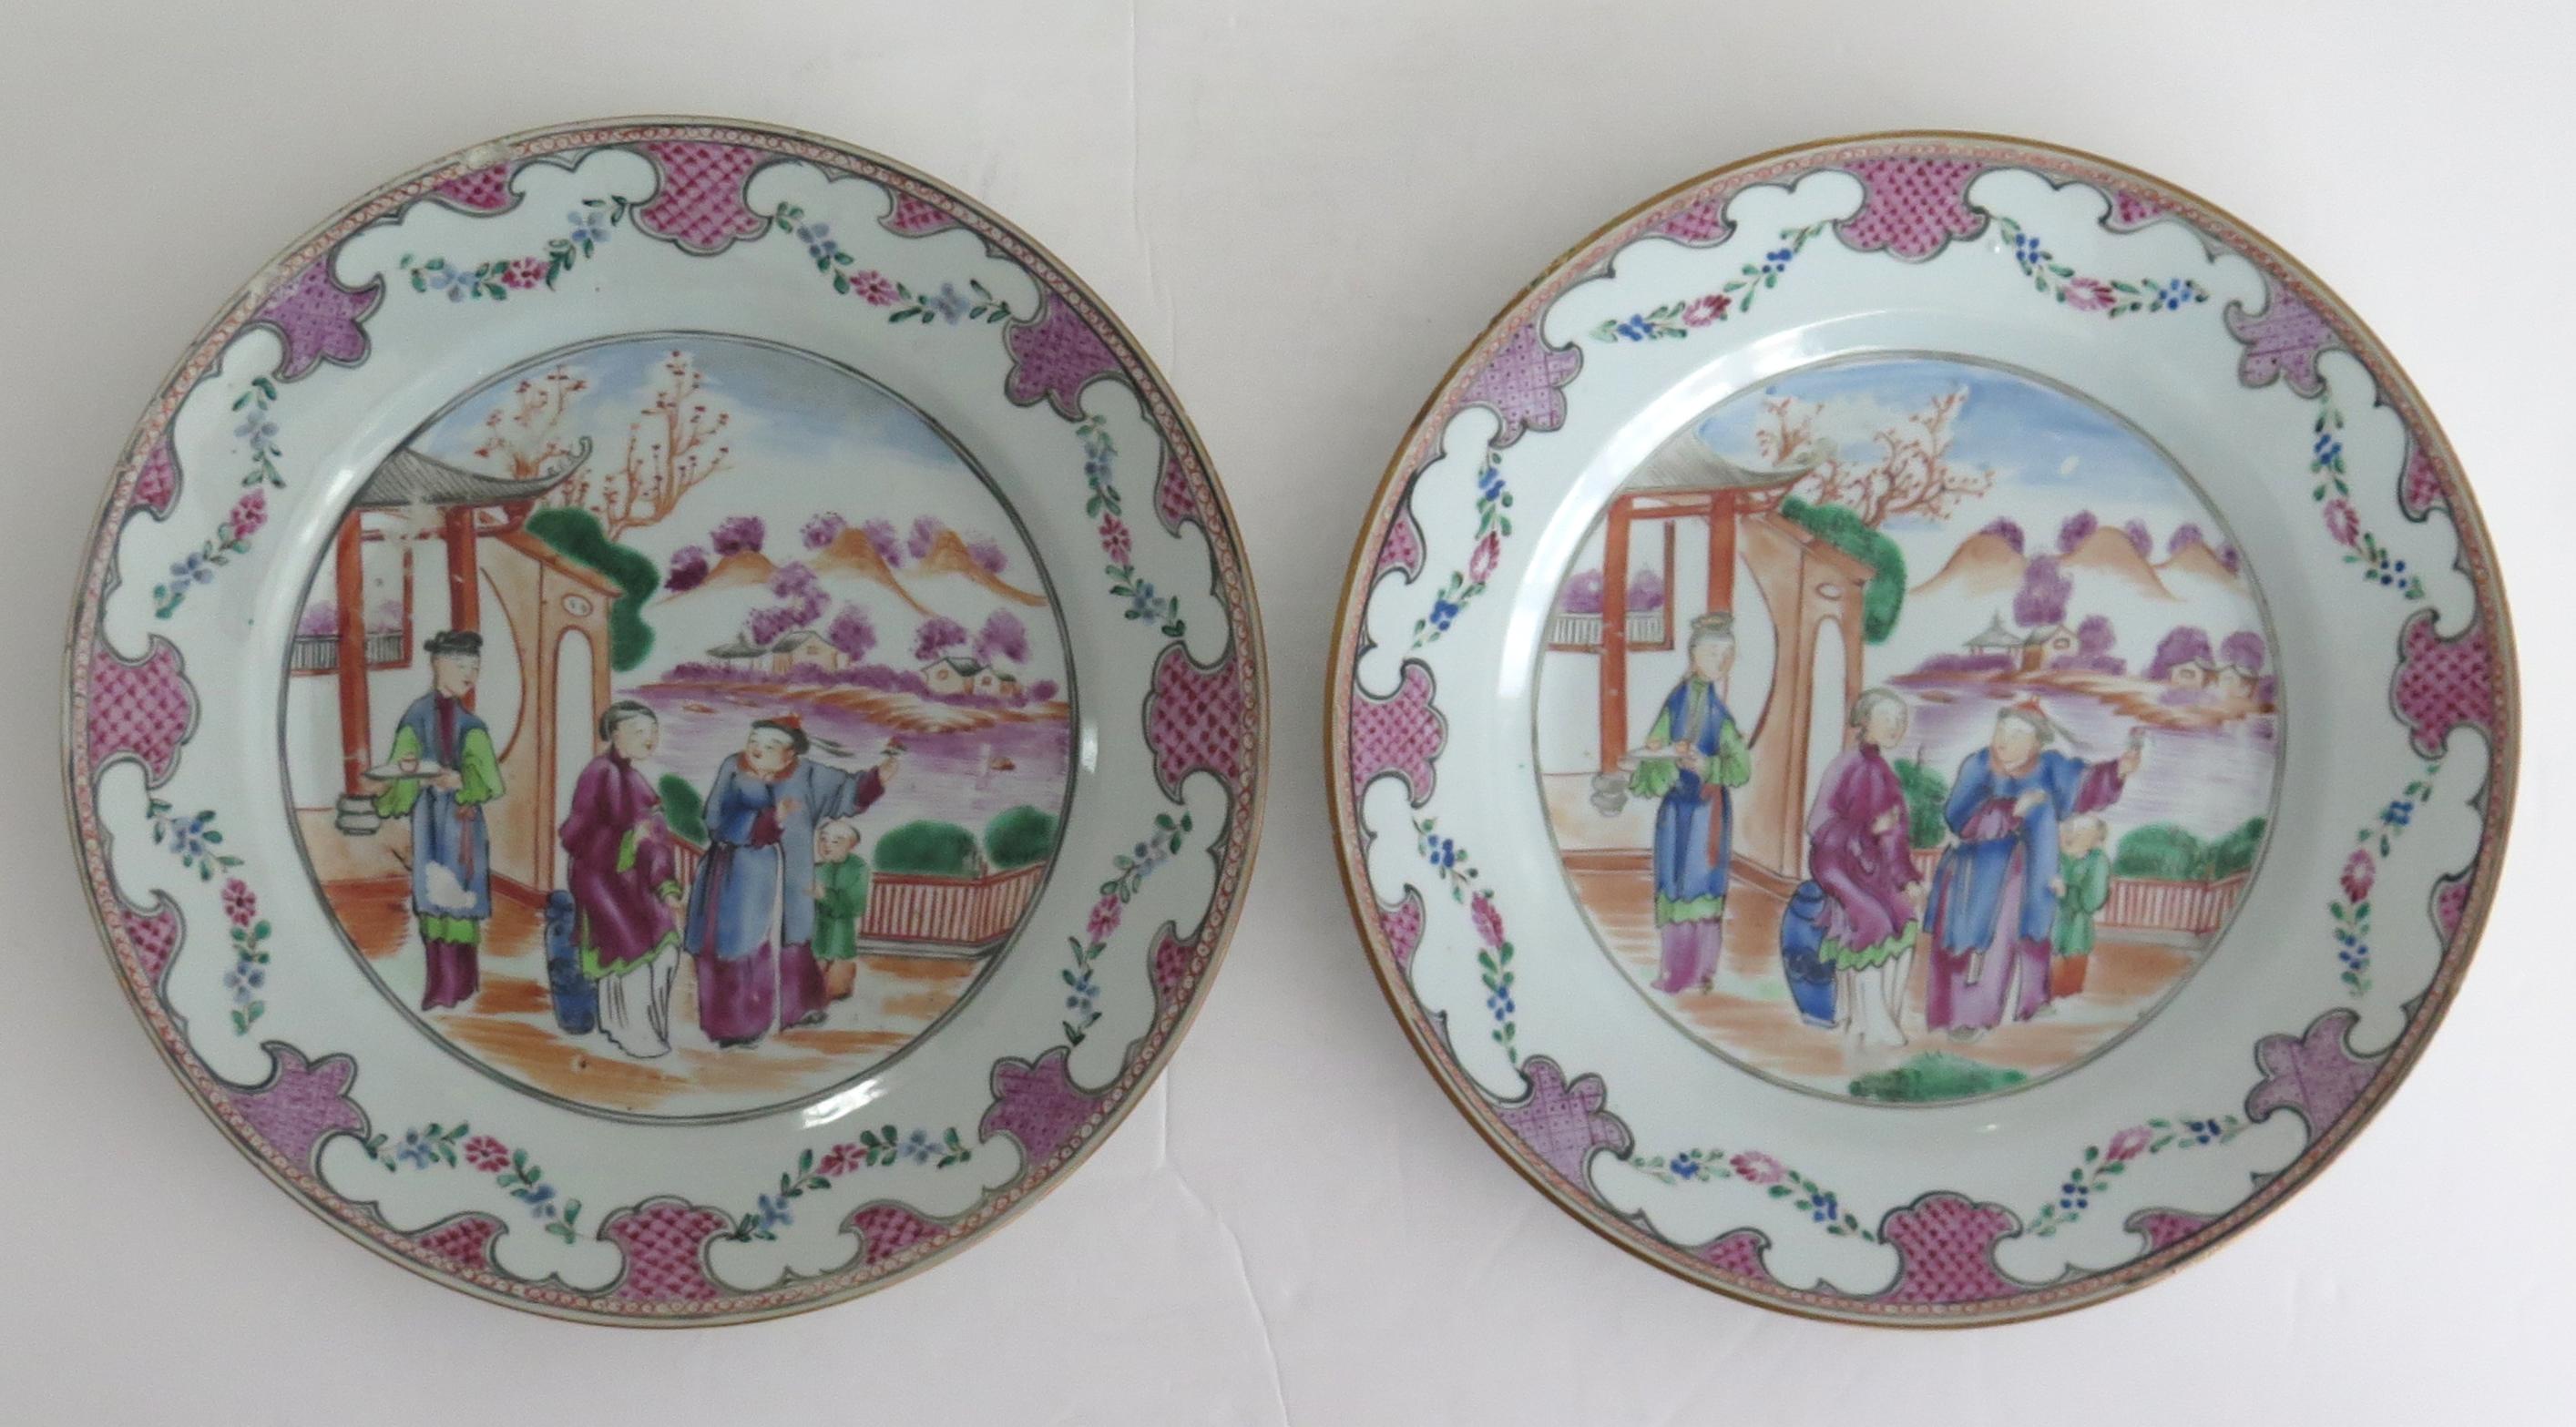 These are a very good pair of Chinese Plates from the 18th century, Qing dynasty, Qianlong period, 1736-1795.

Each plate is beautifully decorated with four figures, in a pagoda setting, having two ladies (long eliza's) a man and child, all on a